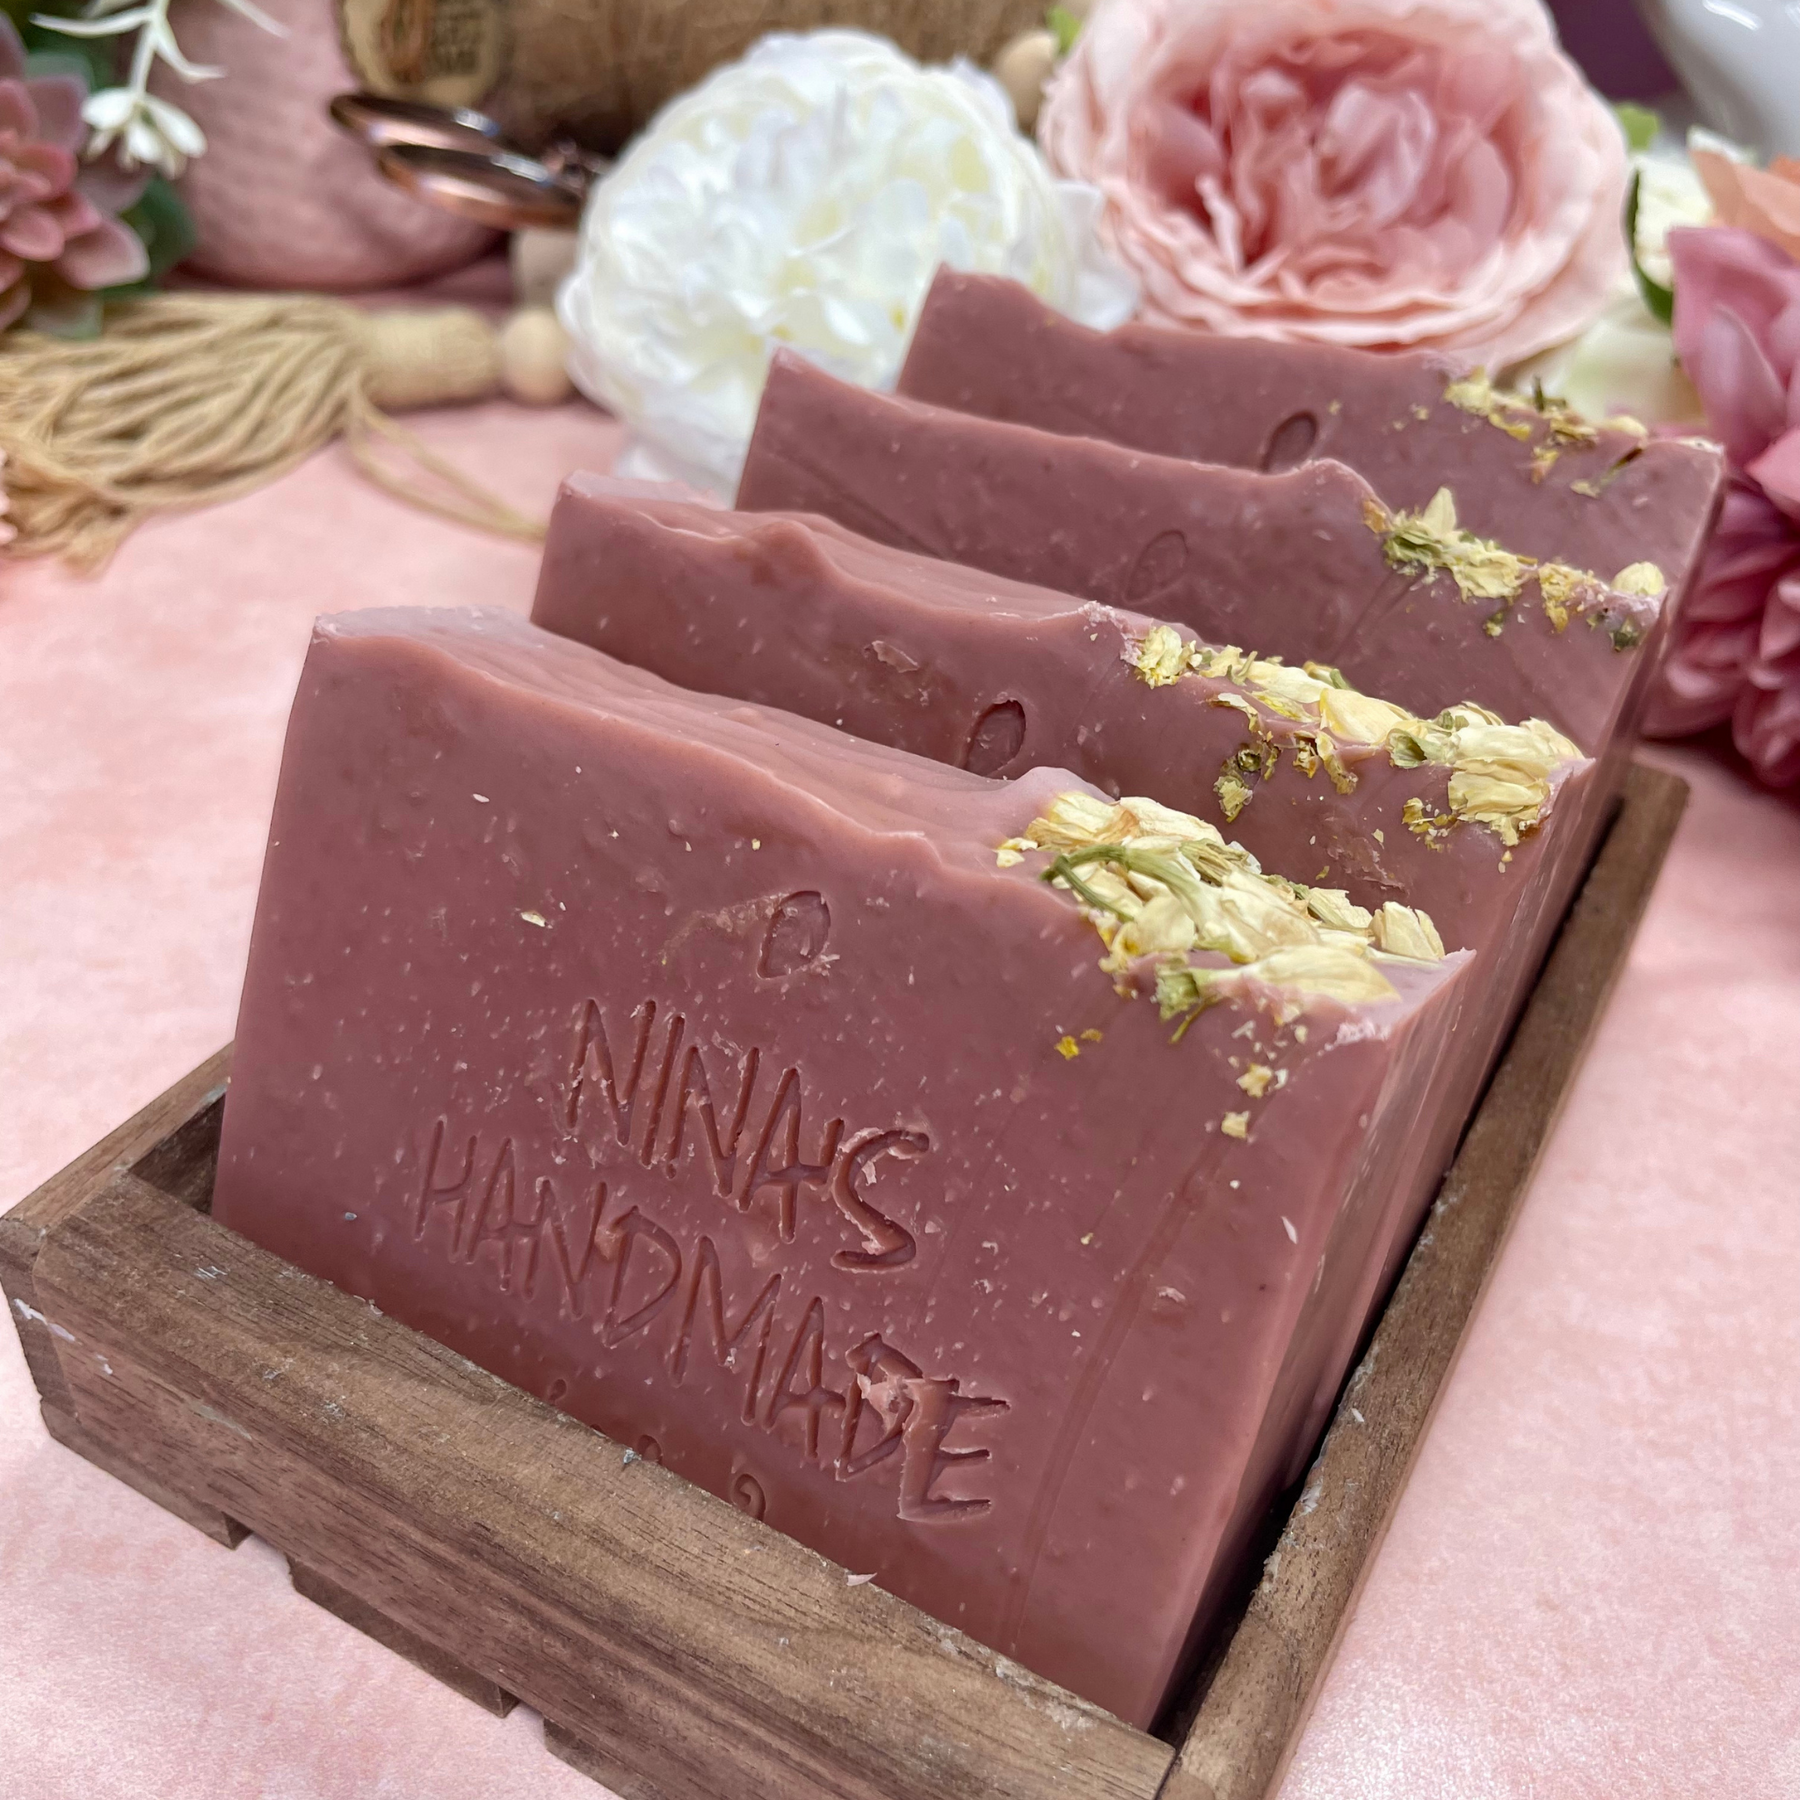 Making Handmade Floral Soap - Cold process with rose clay + dried flowers